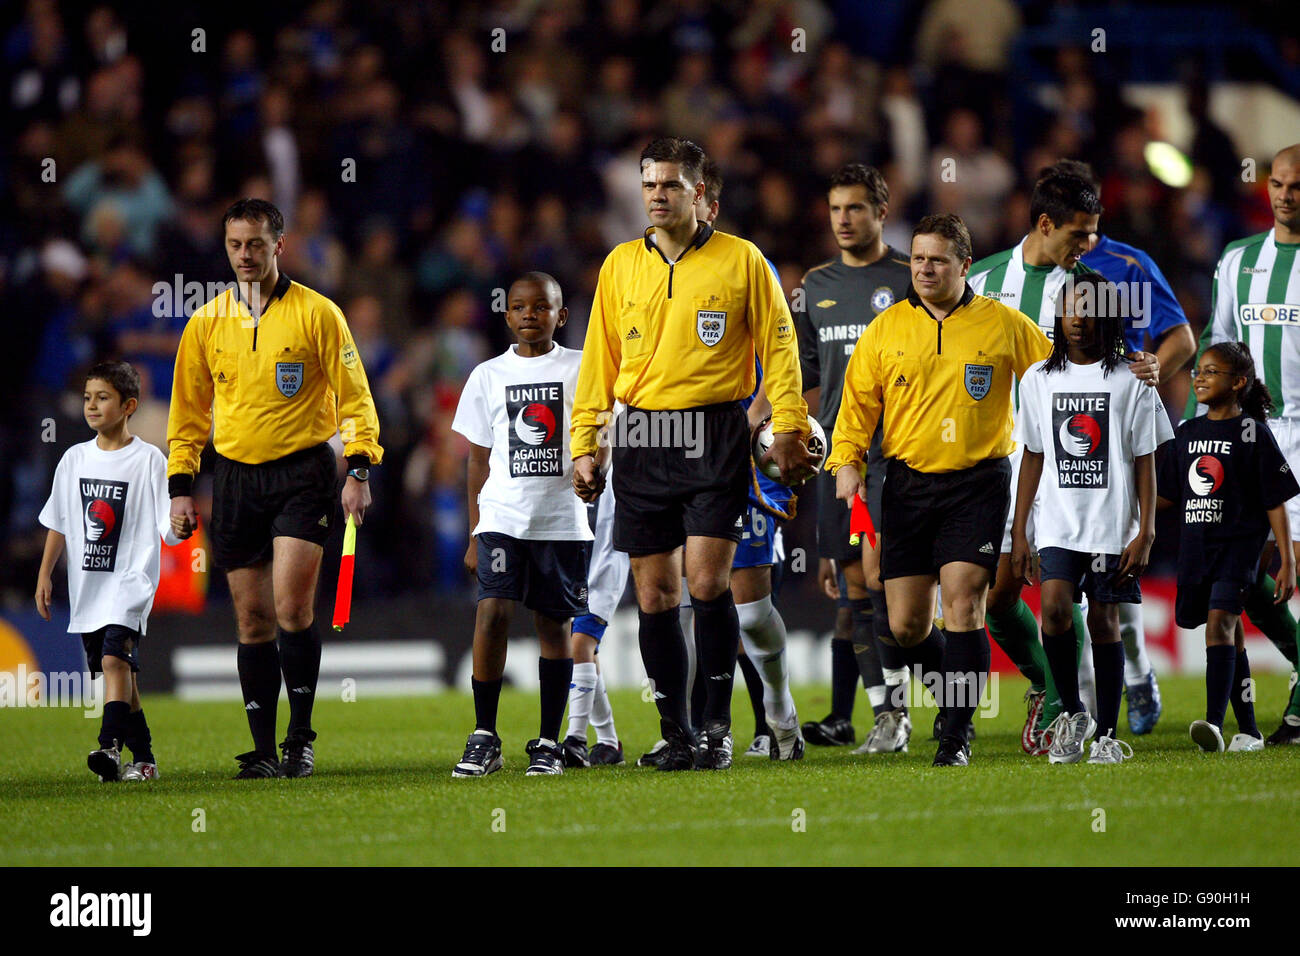 Soccer - UEFA Champions League - Group G - Chelsea v Real Betis - Stamford Bridge. Referee Terje Hauge (c) and his assistants Arild Sundet and Steinar Holvik lead the teams out Stock Photo